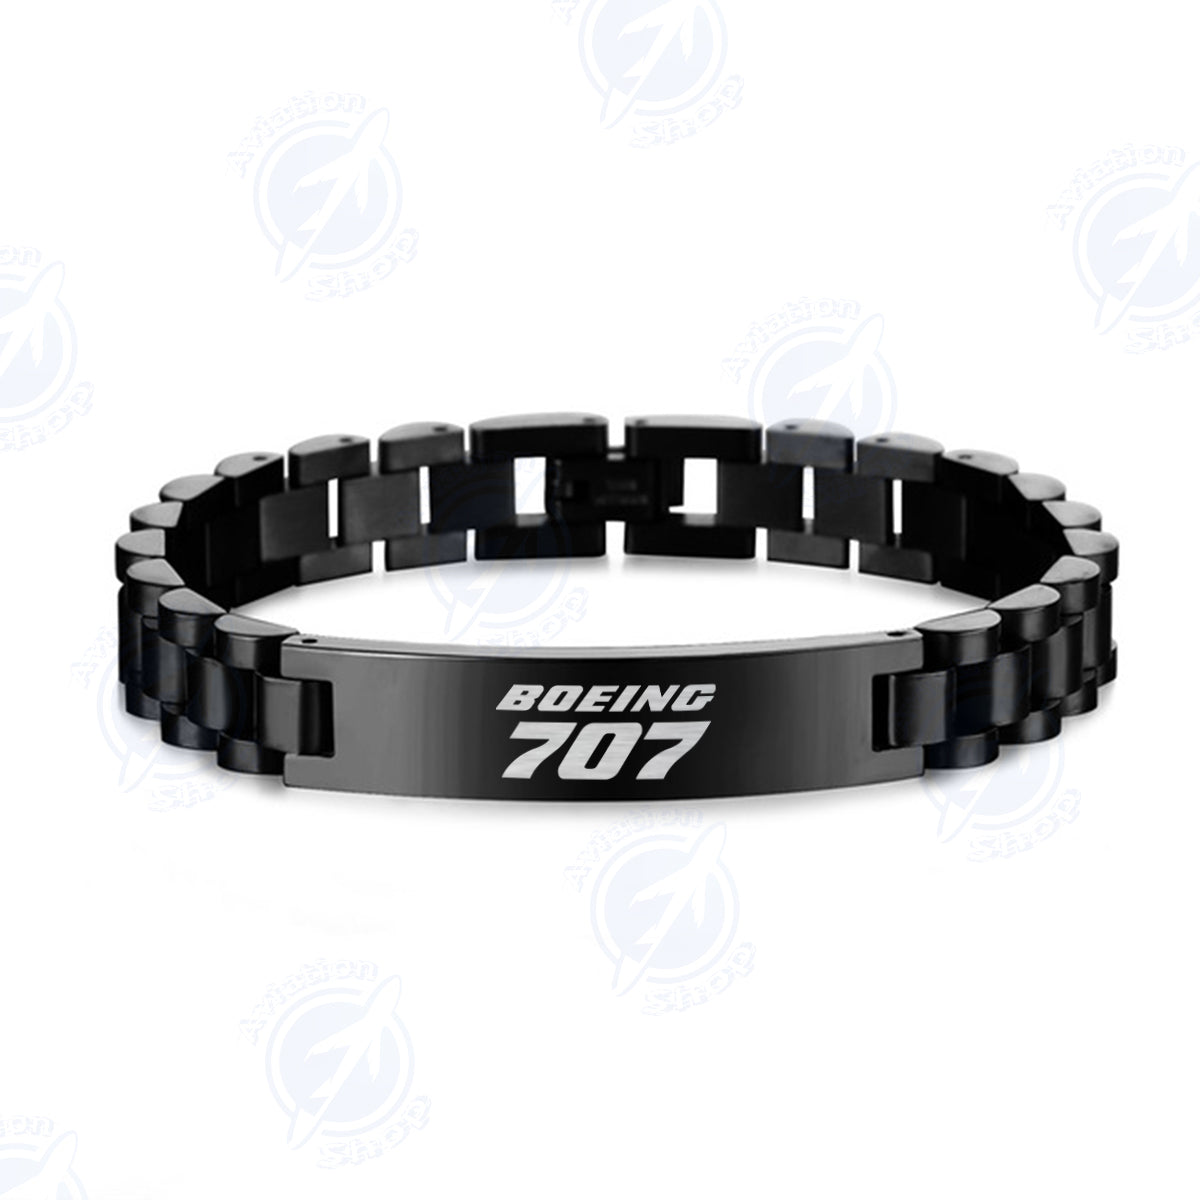 Boeing 707 & Text Designed Stainless Steel Chain Bracelets